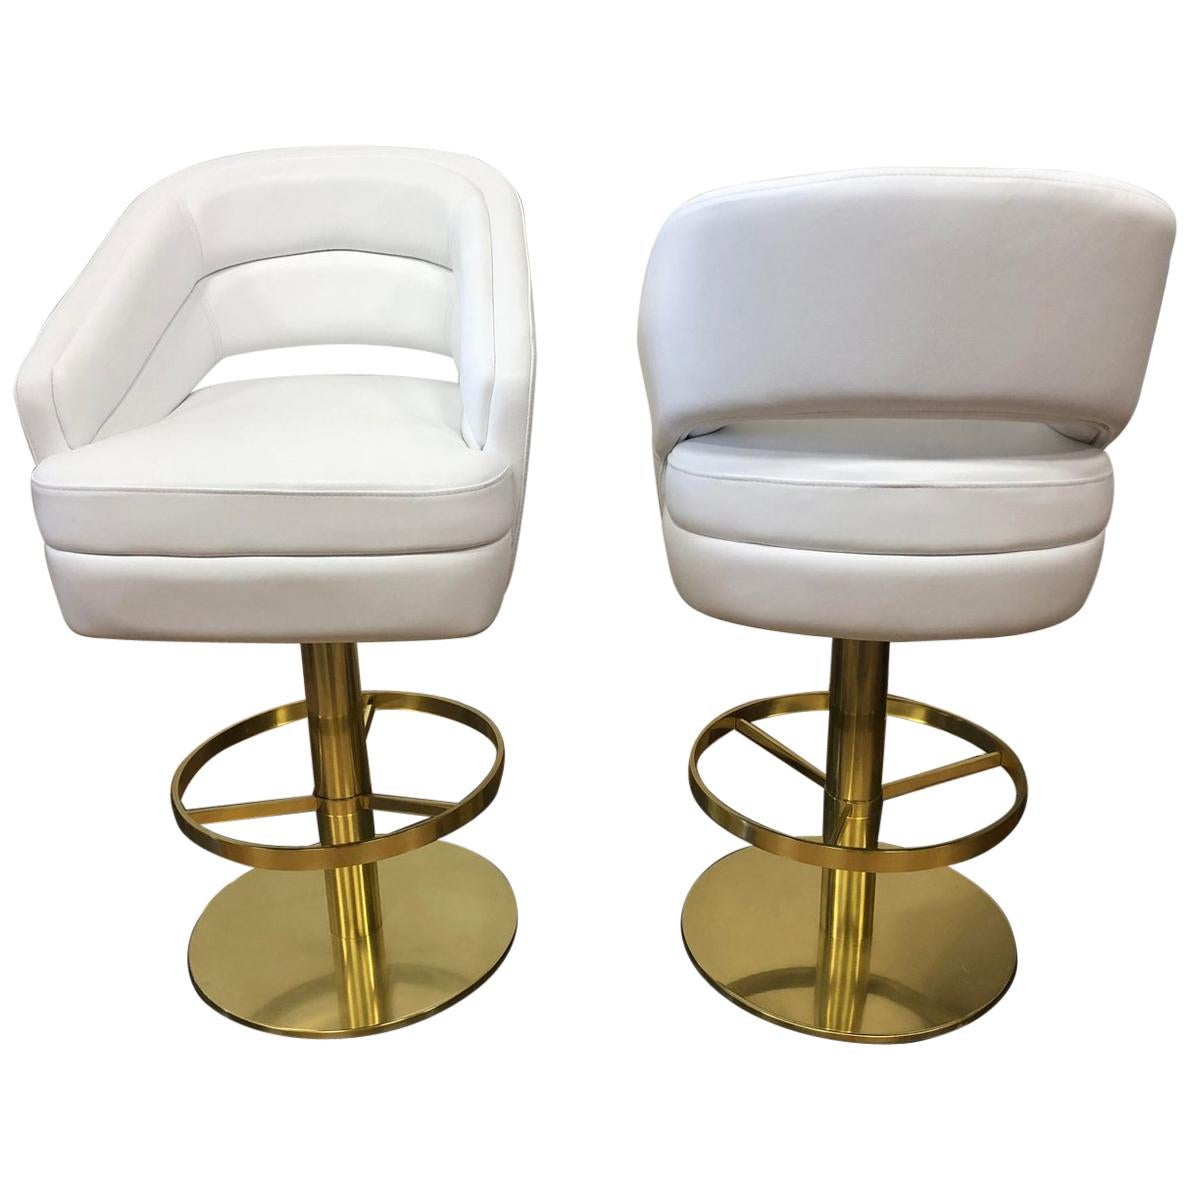 Pair of New Russel Barstools by Essential Homes For Sale